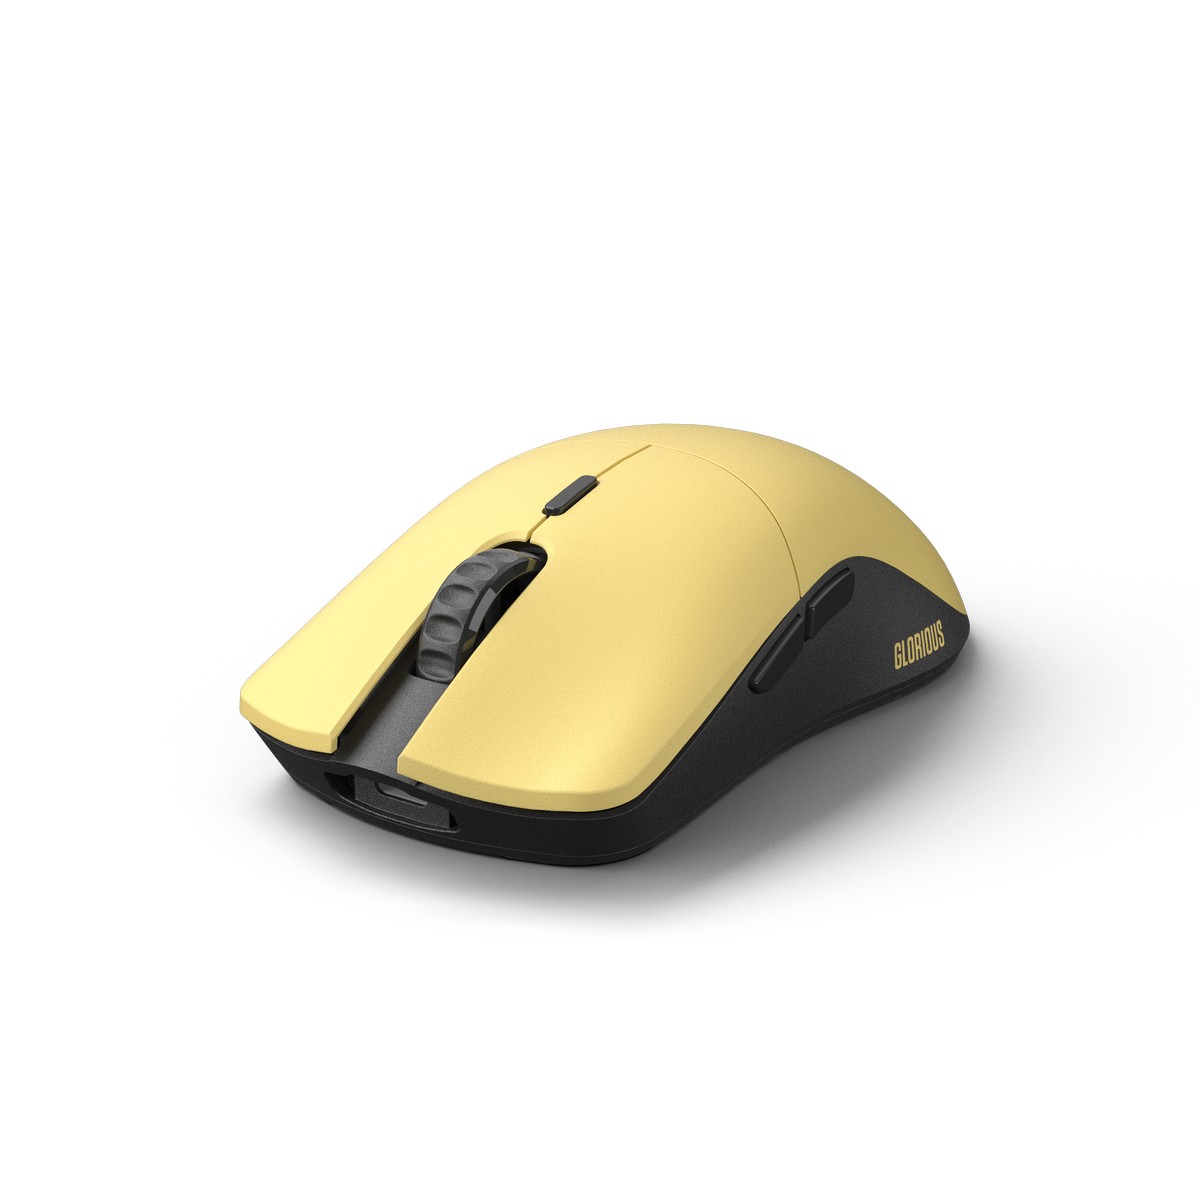 Glorious Model O PRO Wireless Optical Gaming Mouse - Golden Panda (GLO-MS-OW-GP-FORGE)